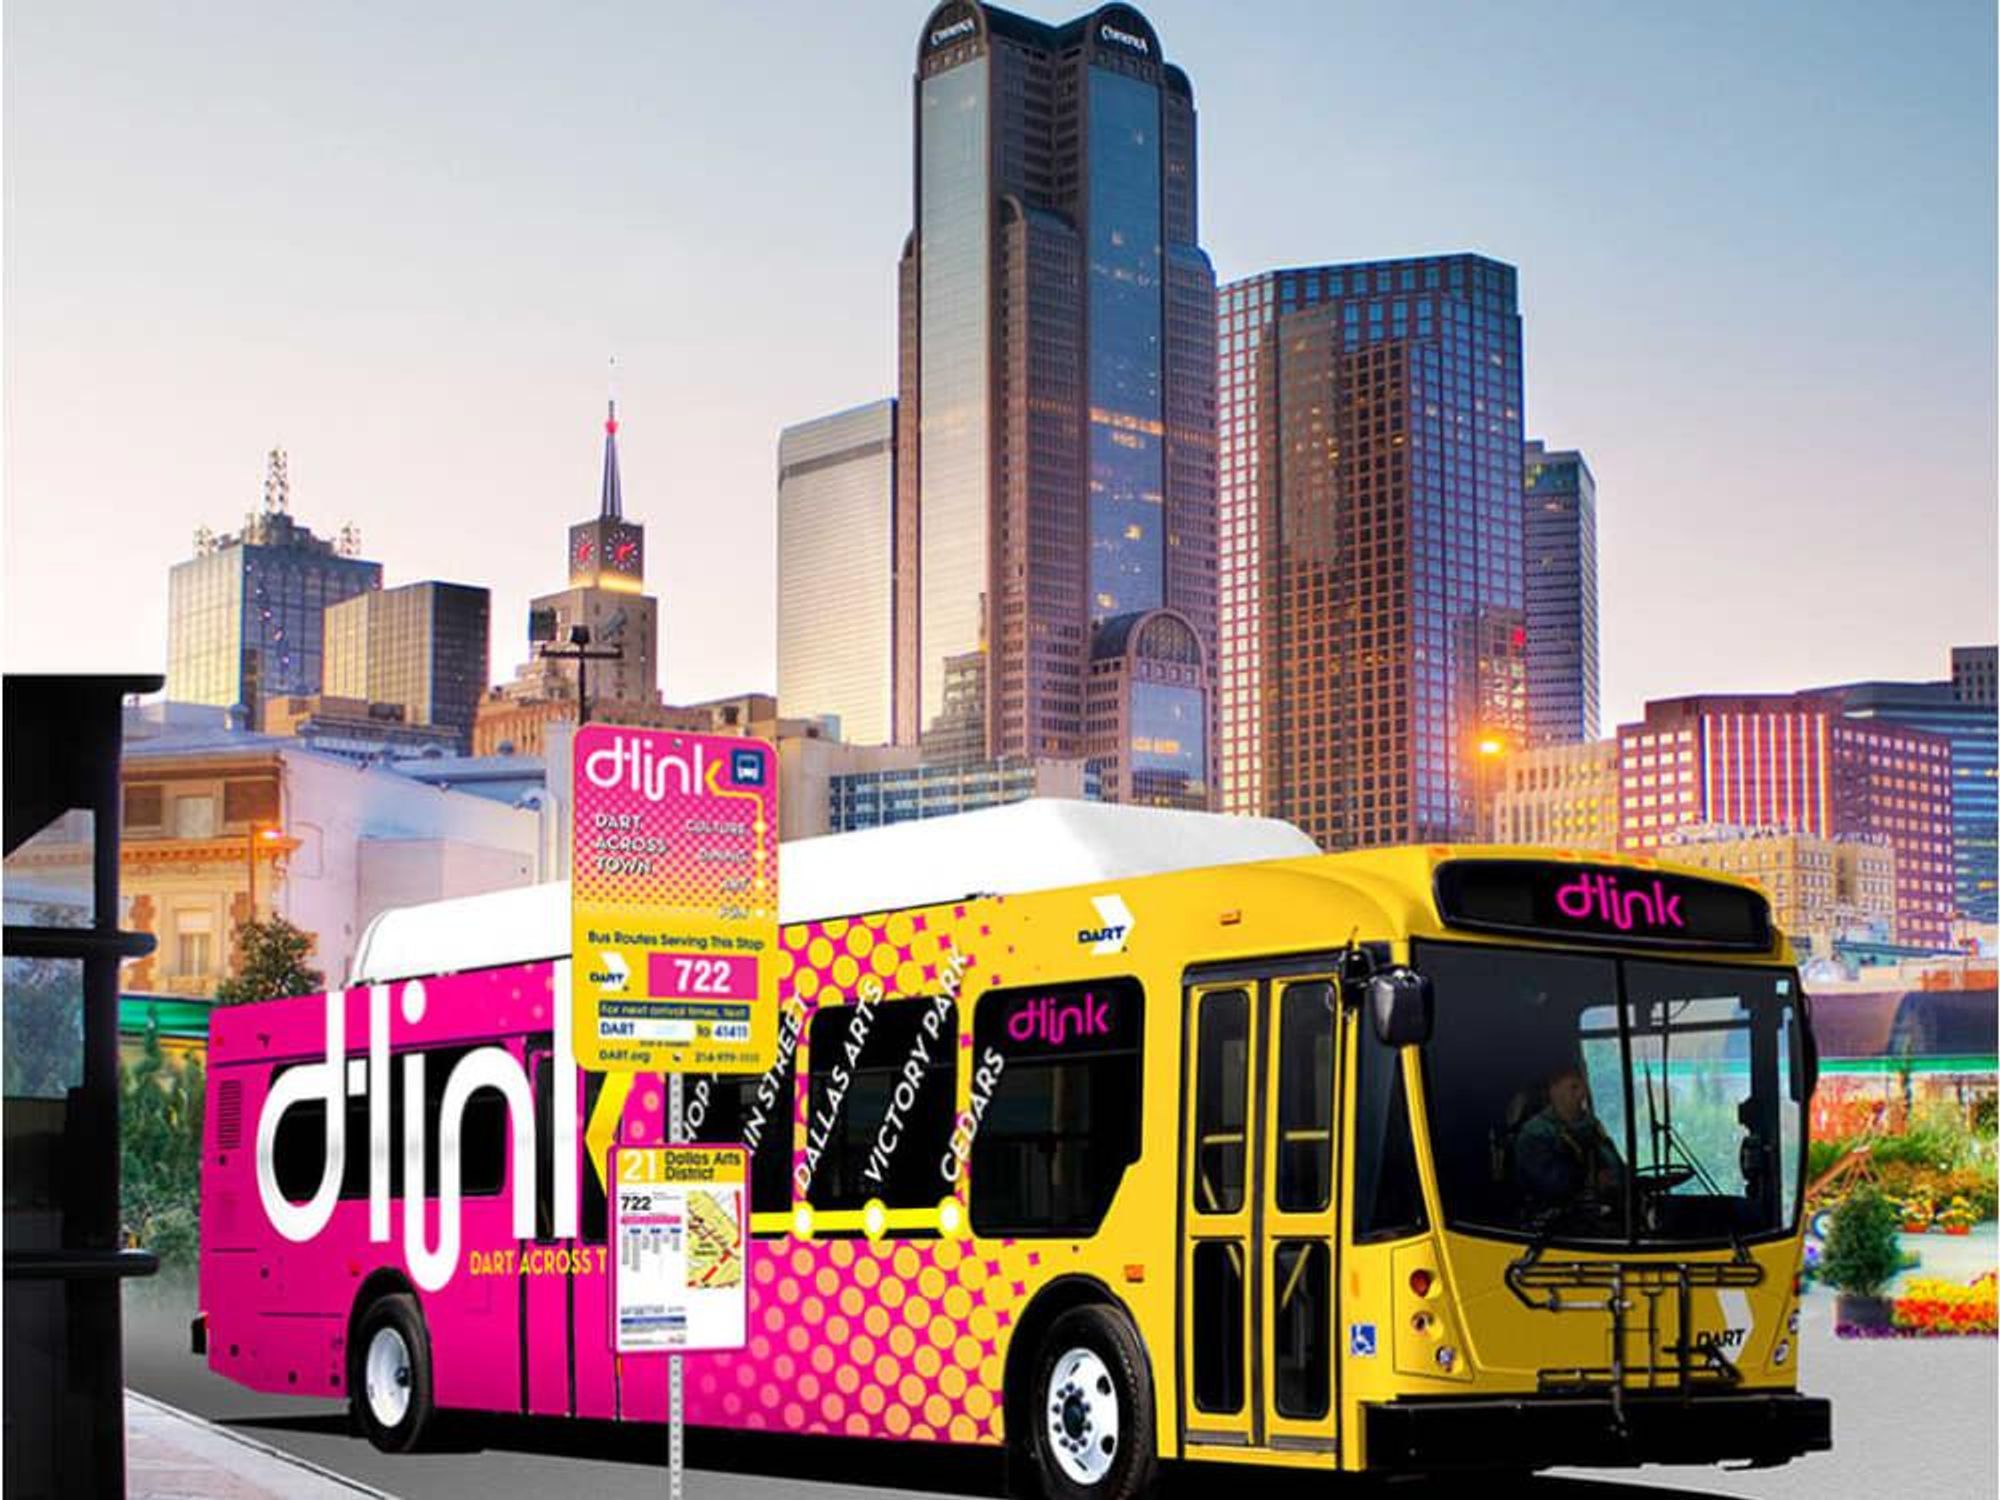 D-Link is a free shuttle in downtown Dallas